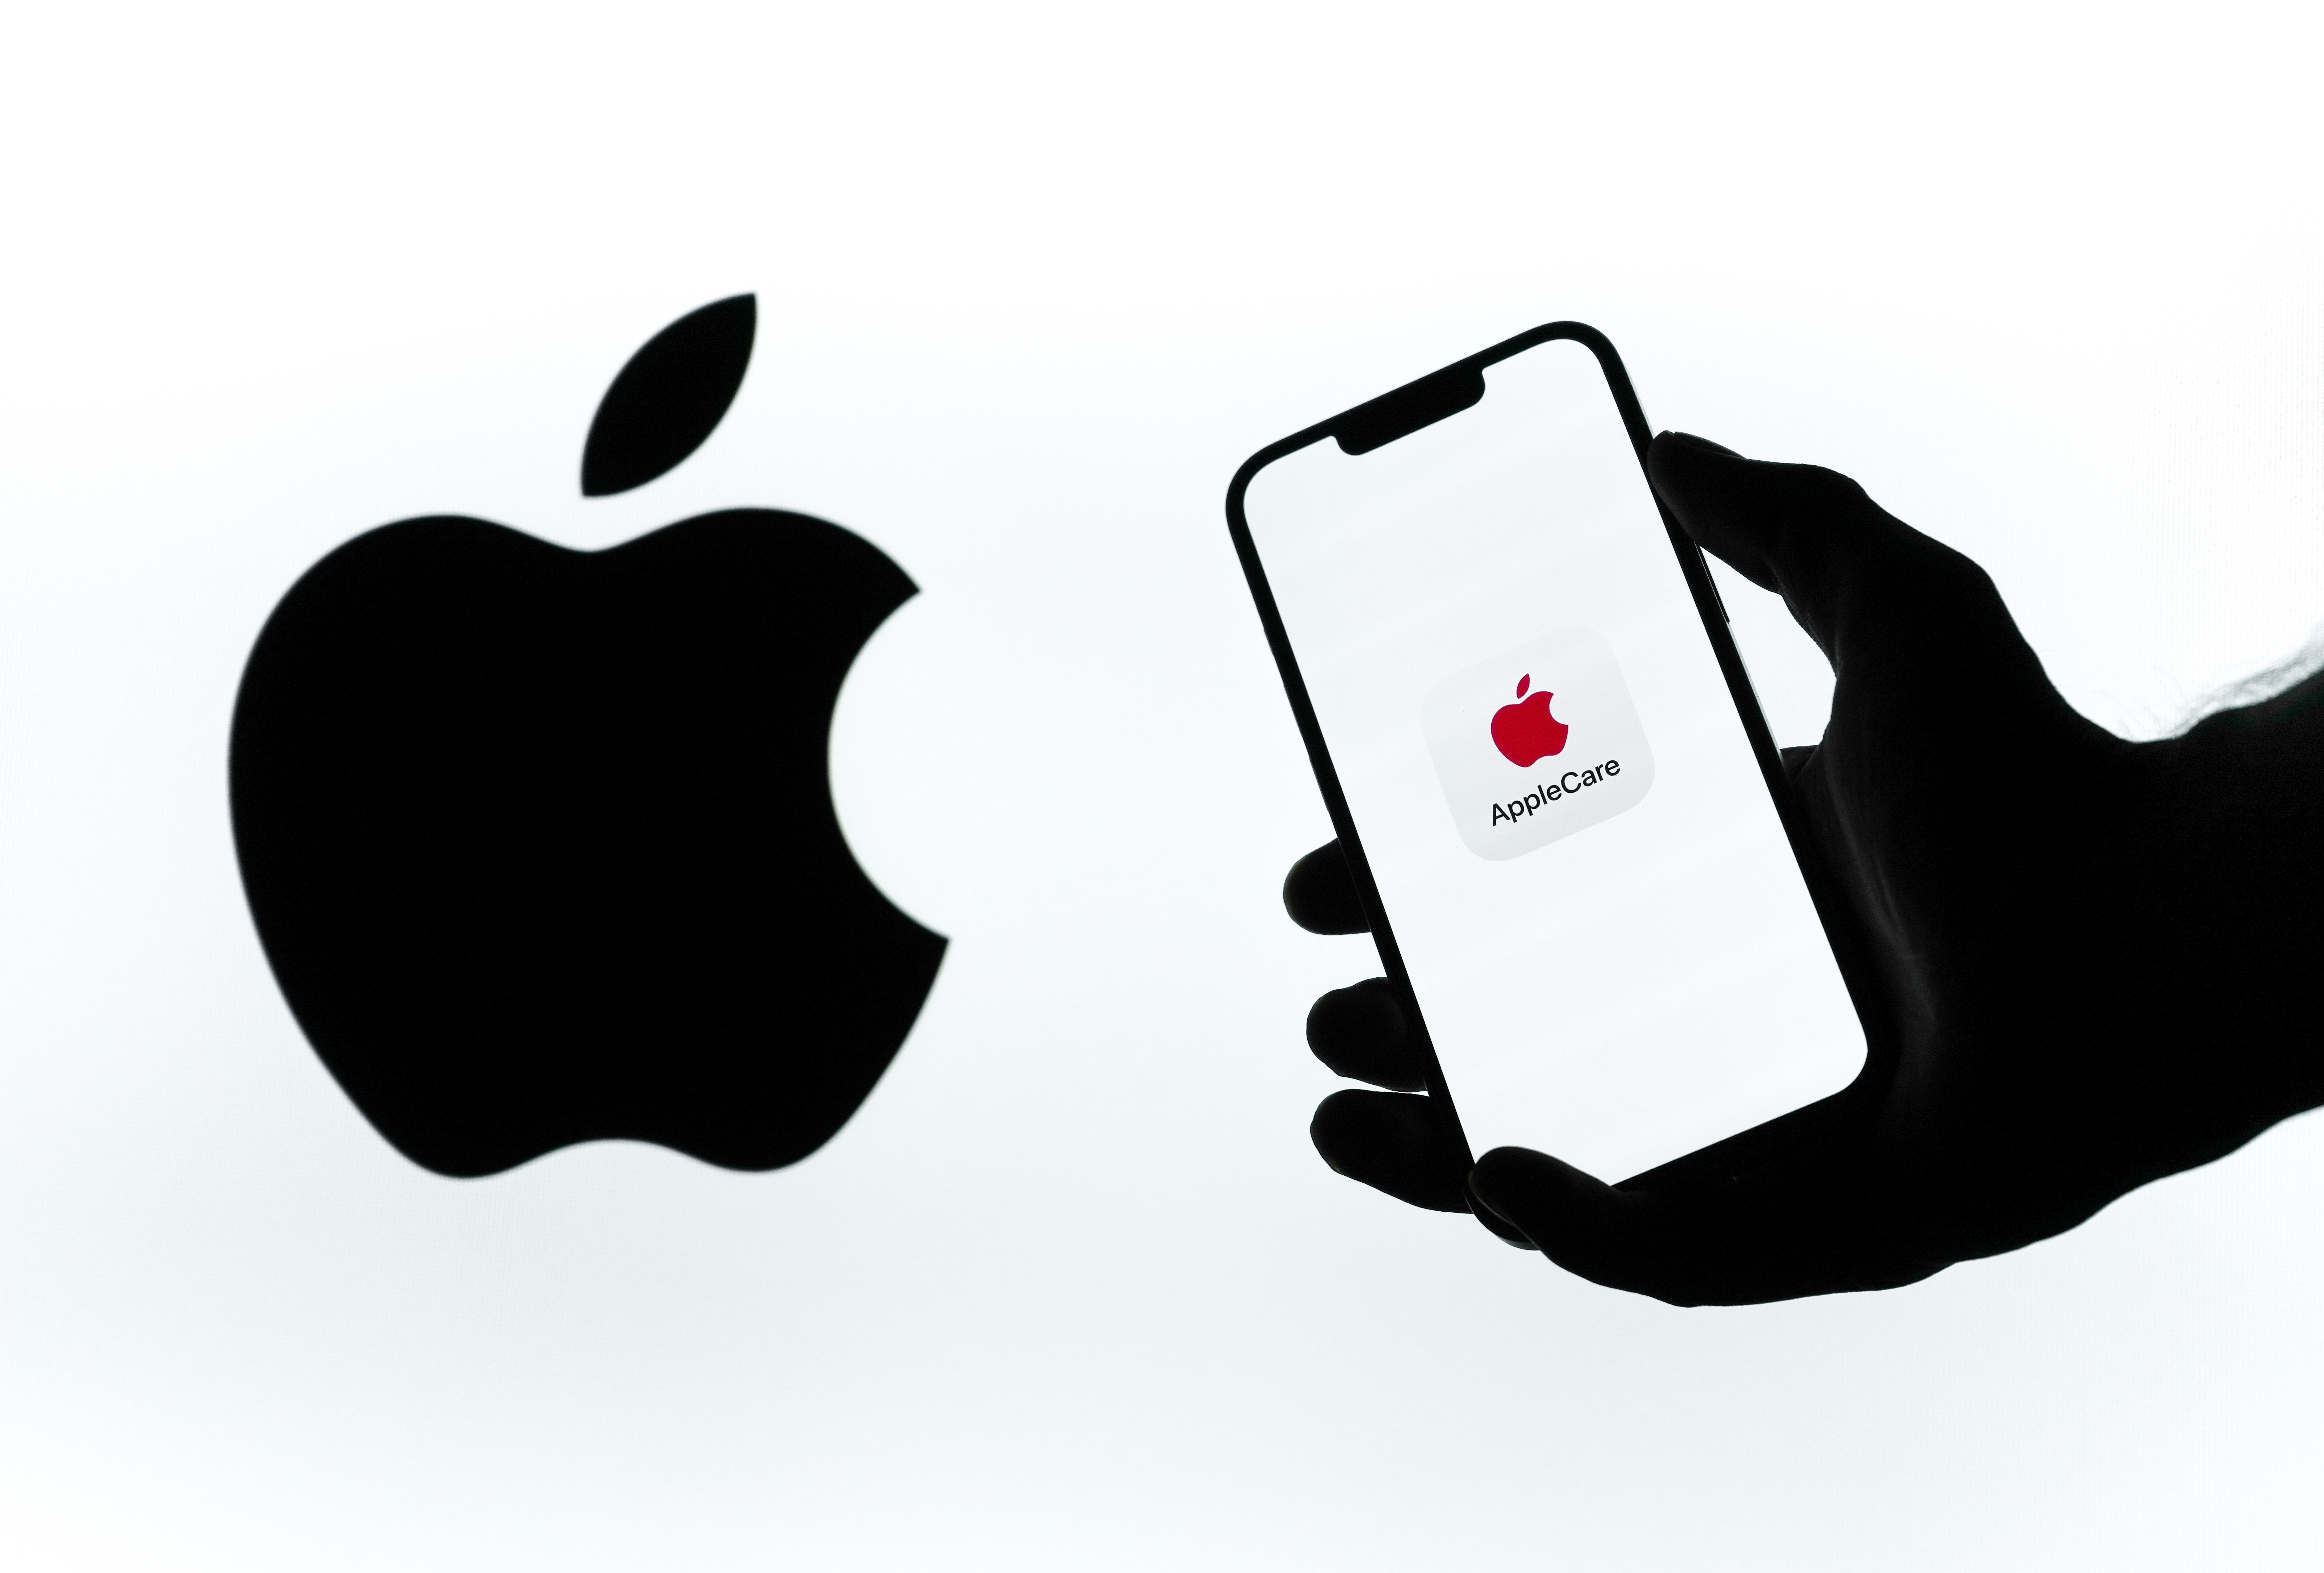 Person holding an iPhone with the AppleCare logo on it in front of the Apple logo